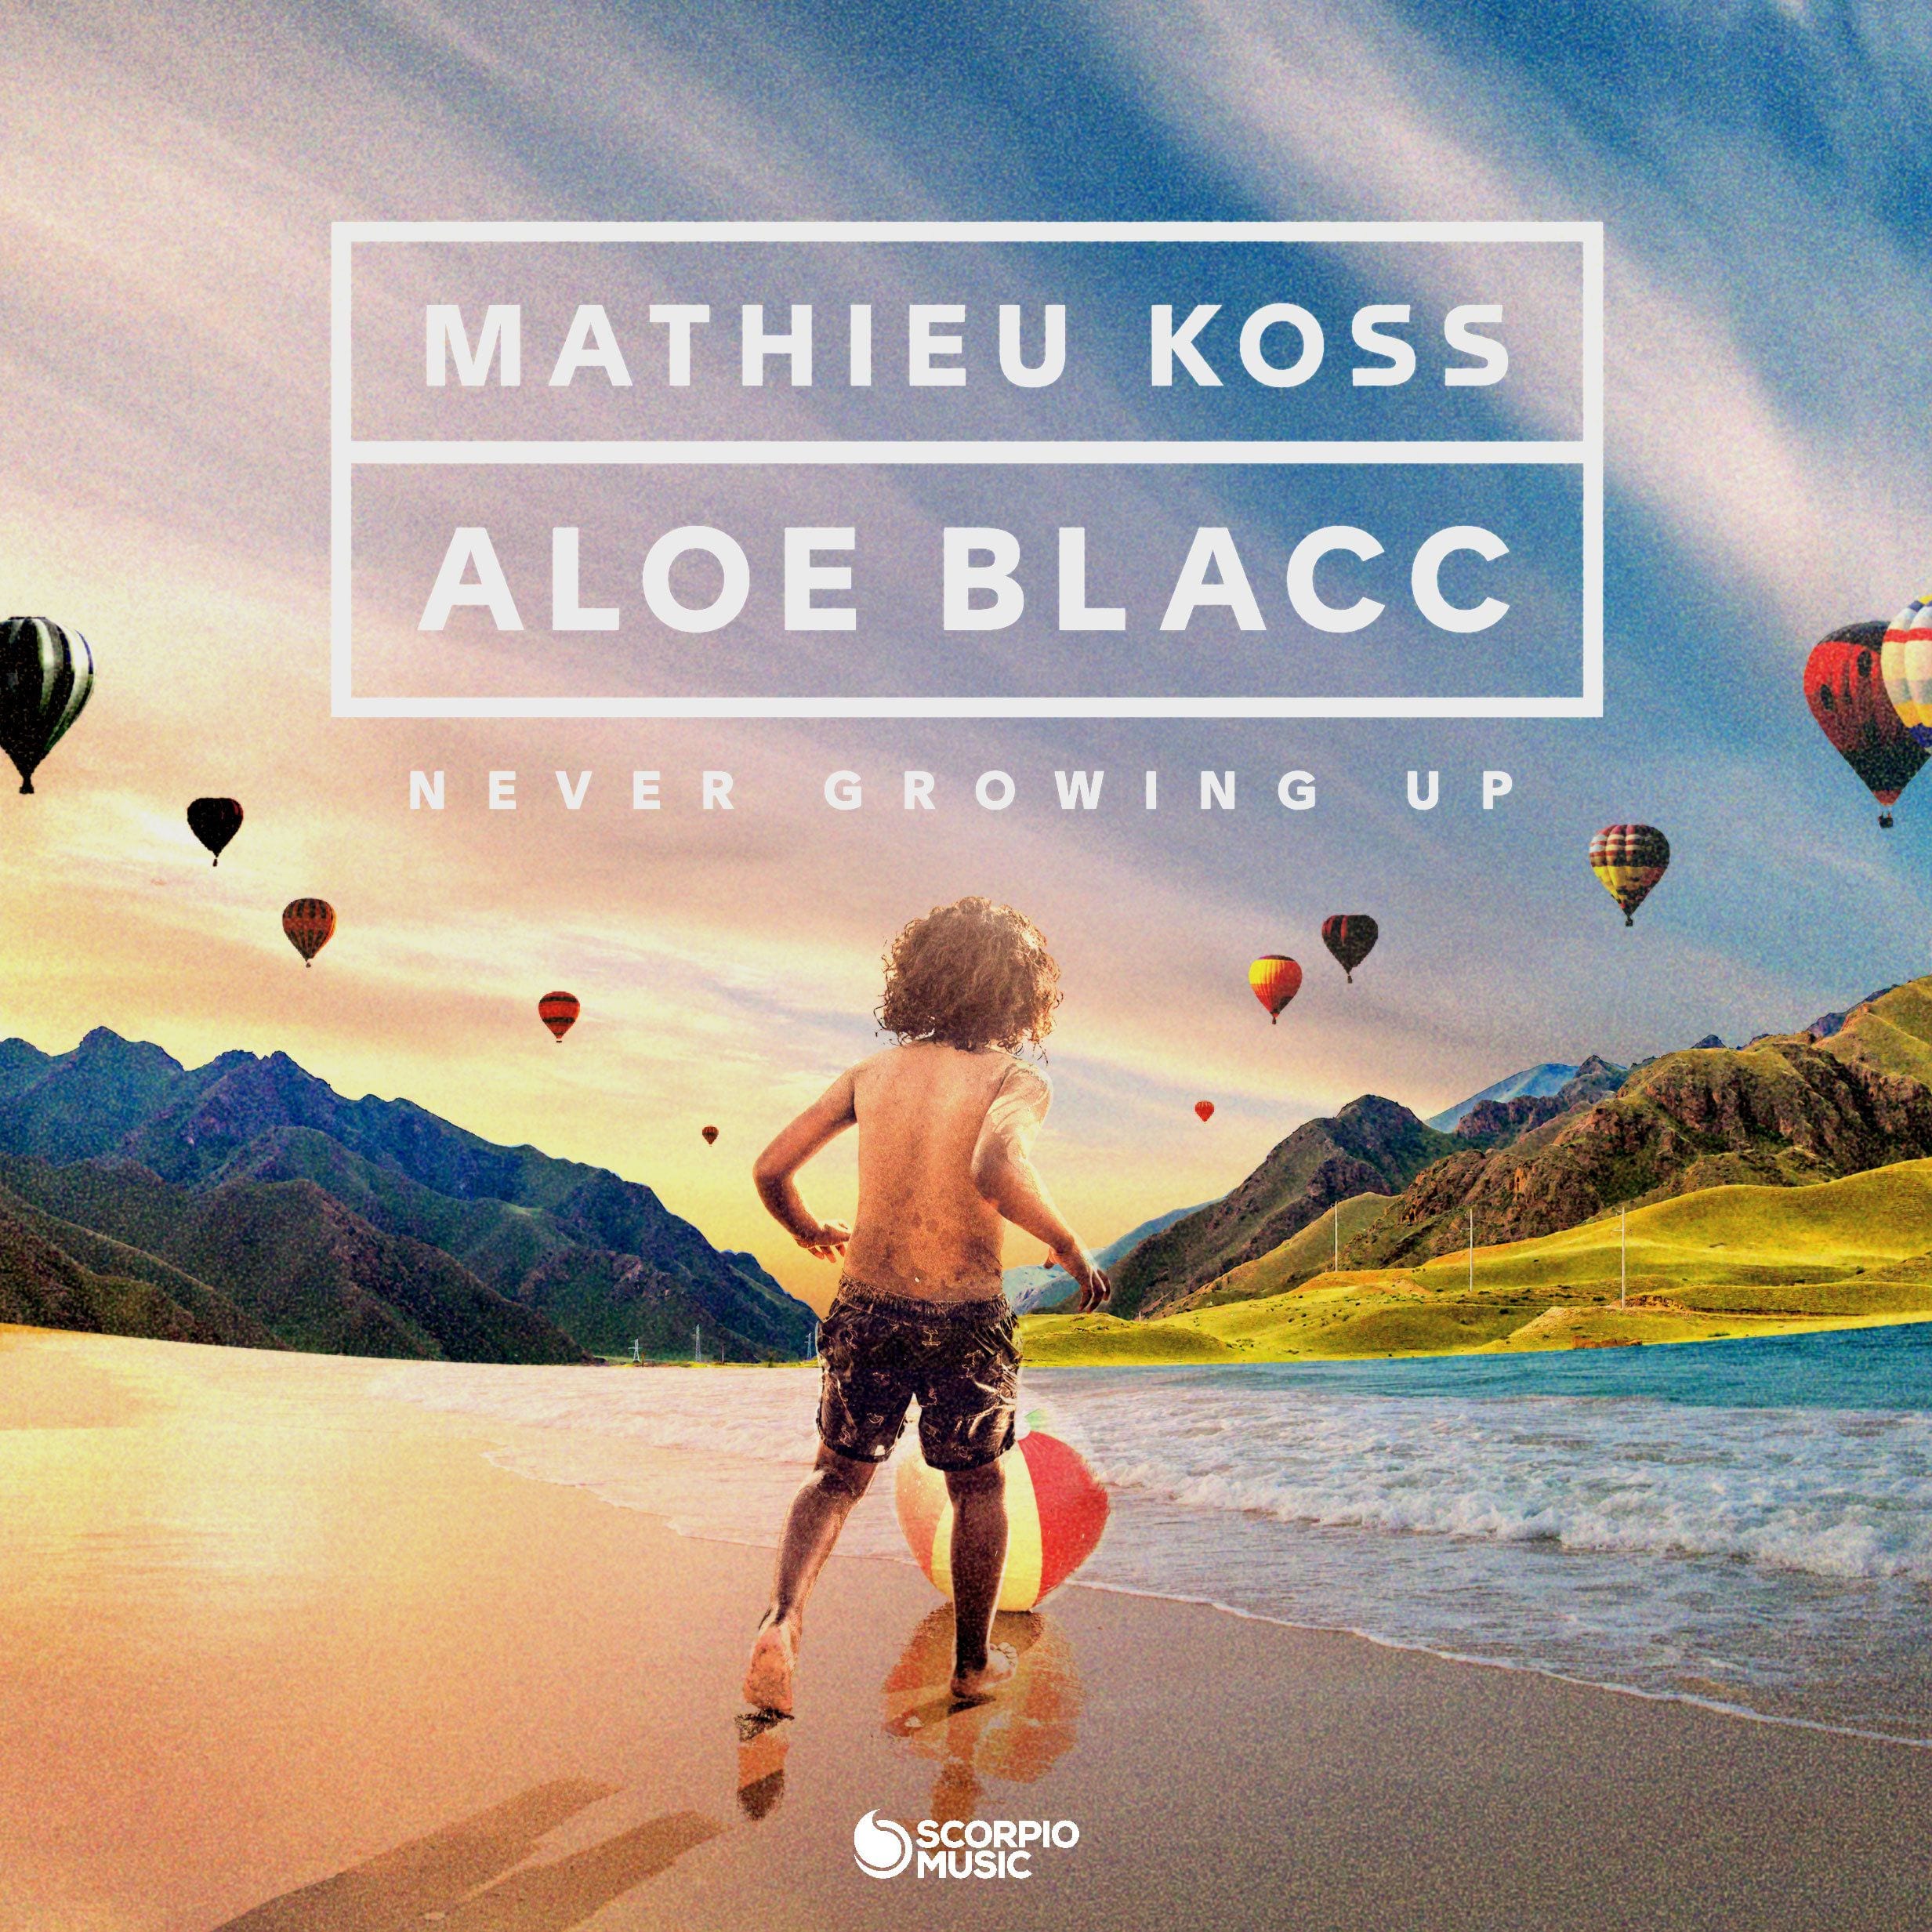 French DJ and Producer Mathieu Koss Teams Up with Aloe Blacc on “Never Growing Up” (premiere)